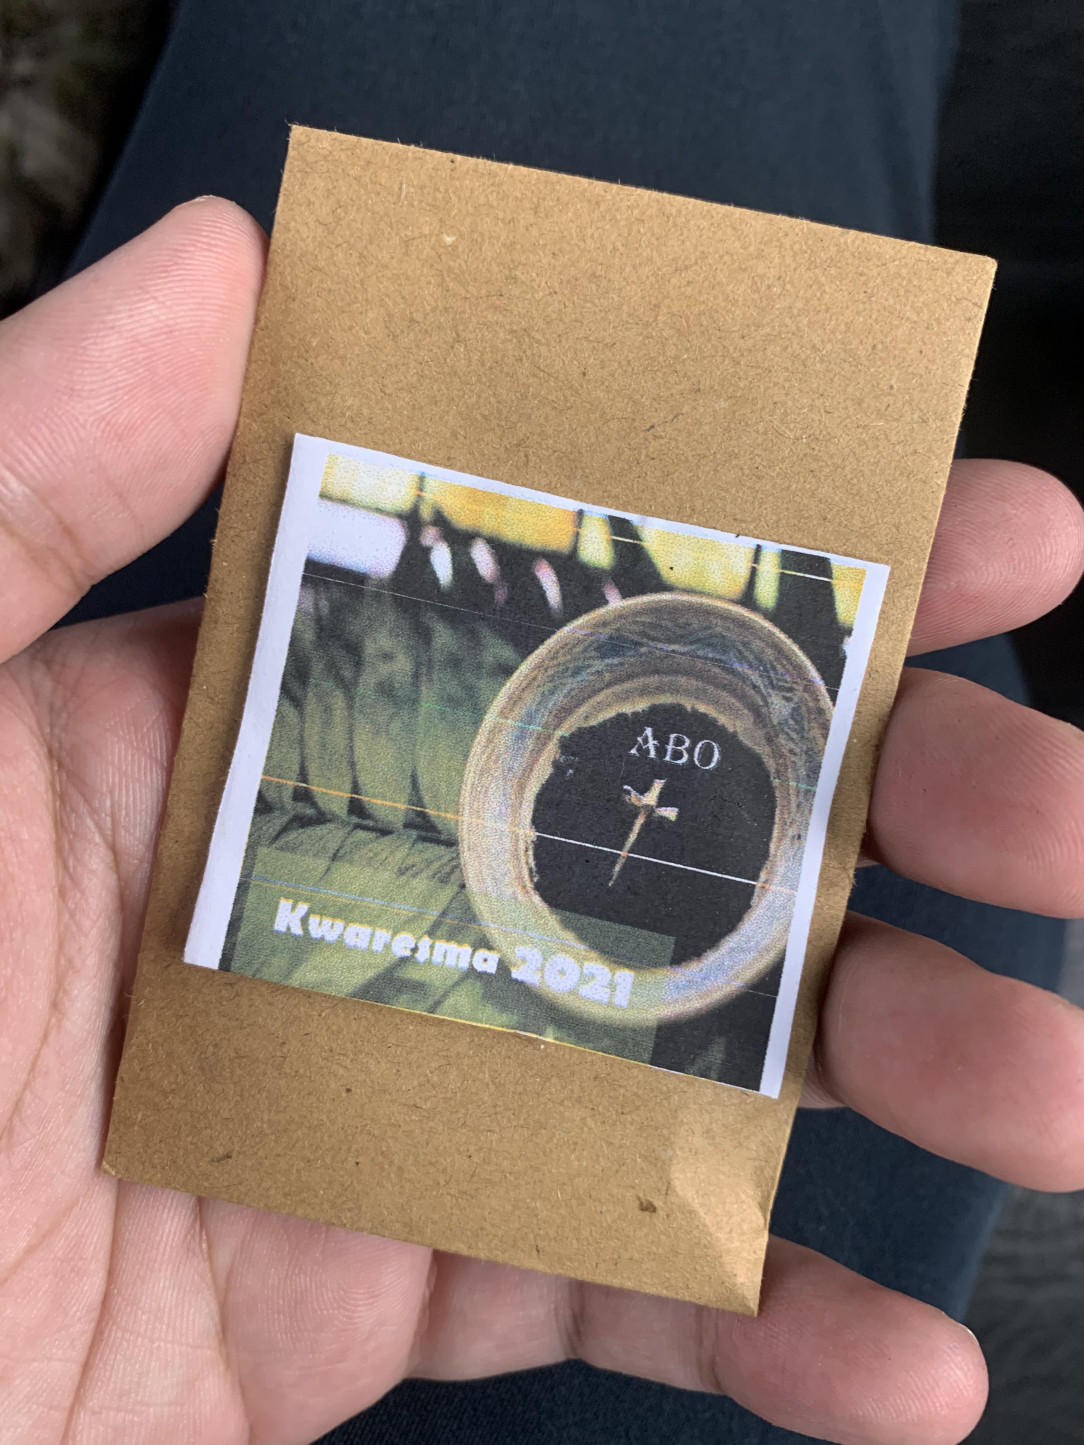 Our local church gave us packets of ash to anoint family members who can’t come to church